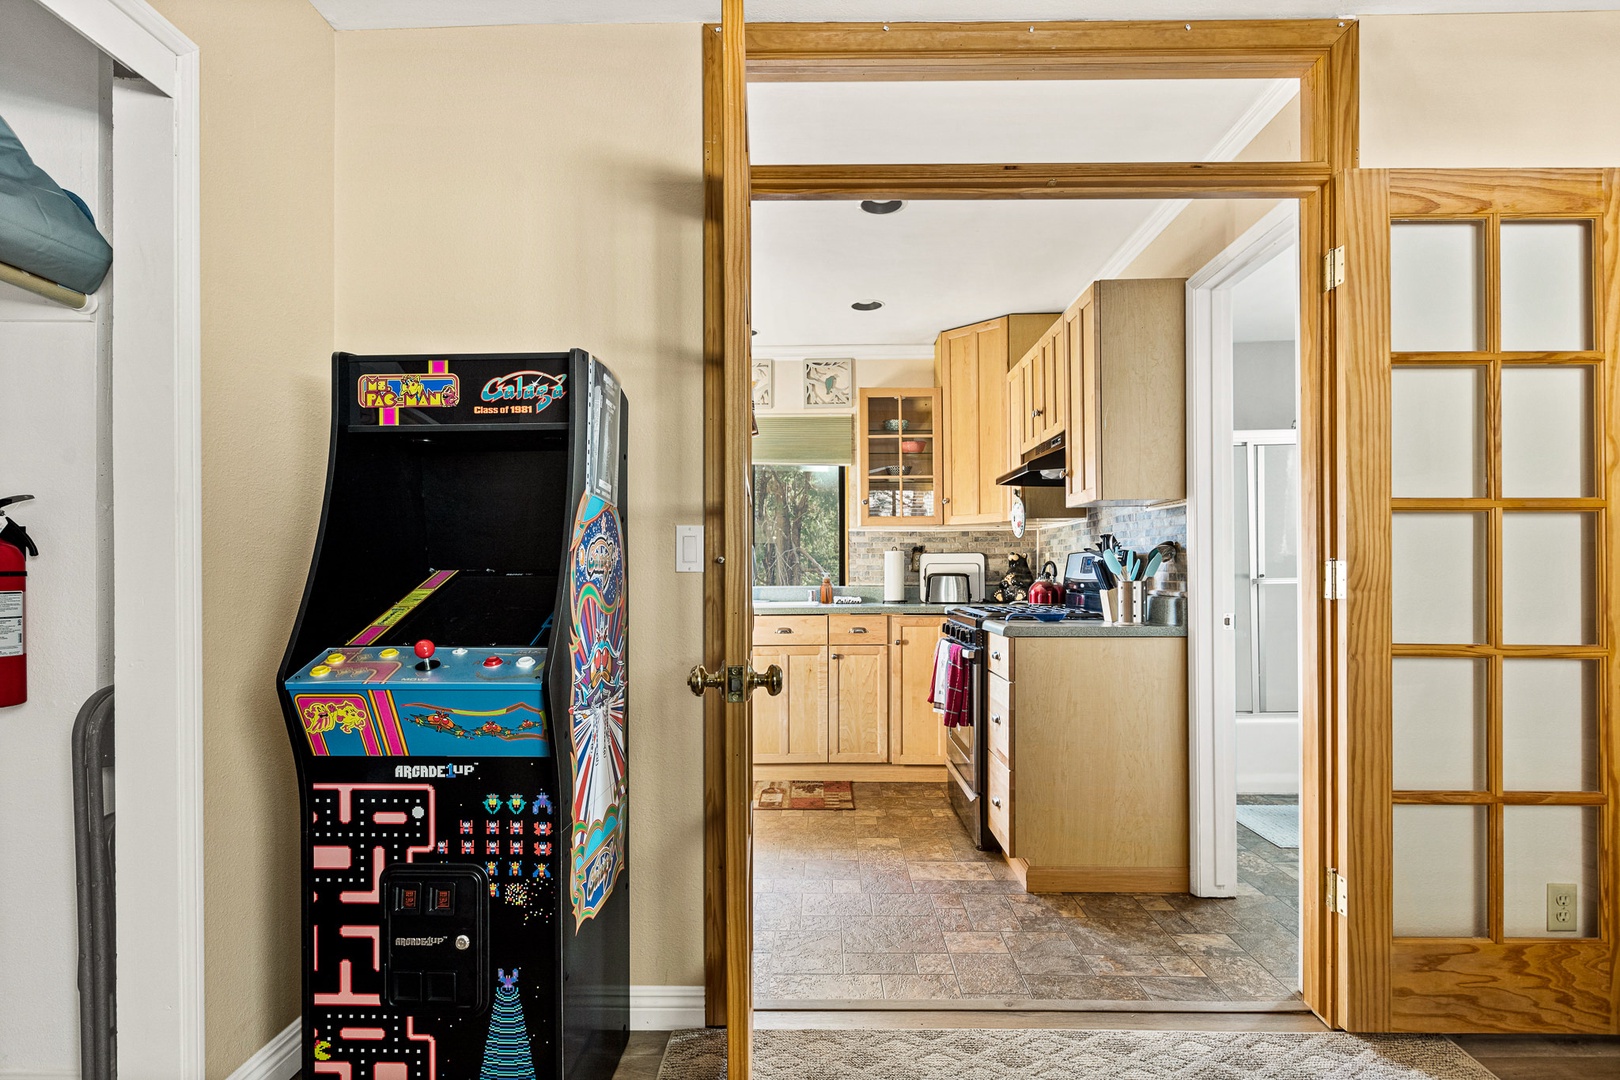 Unwind on the full futon or unleash your competitive side on the arcade game